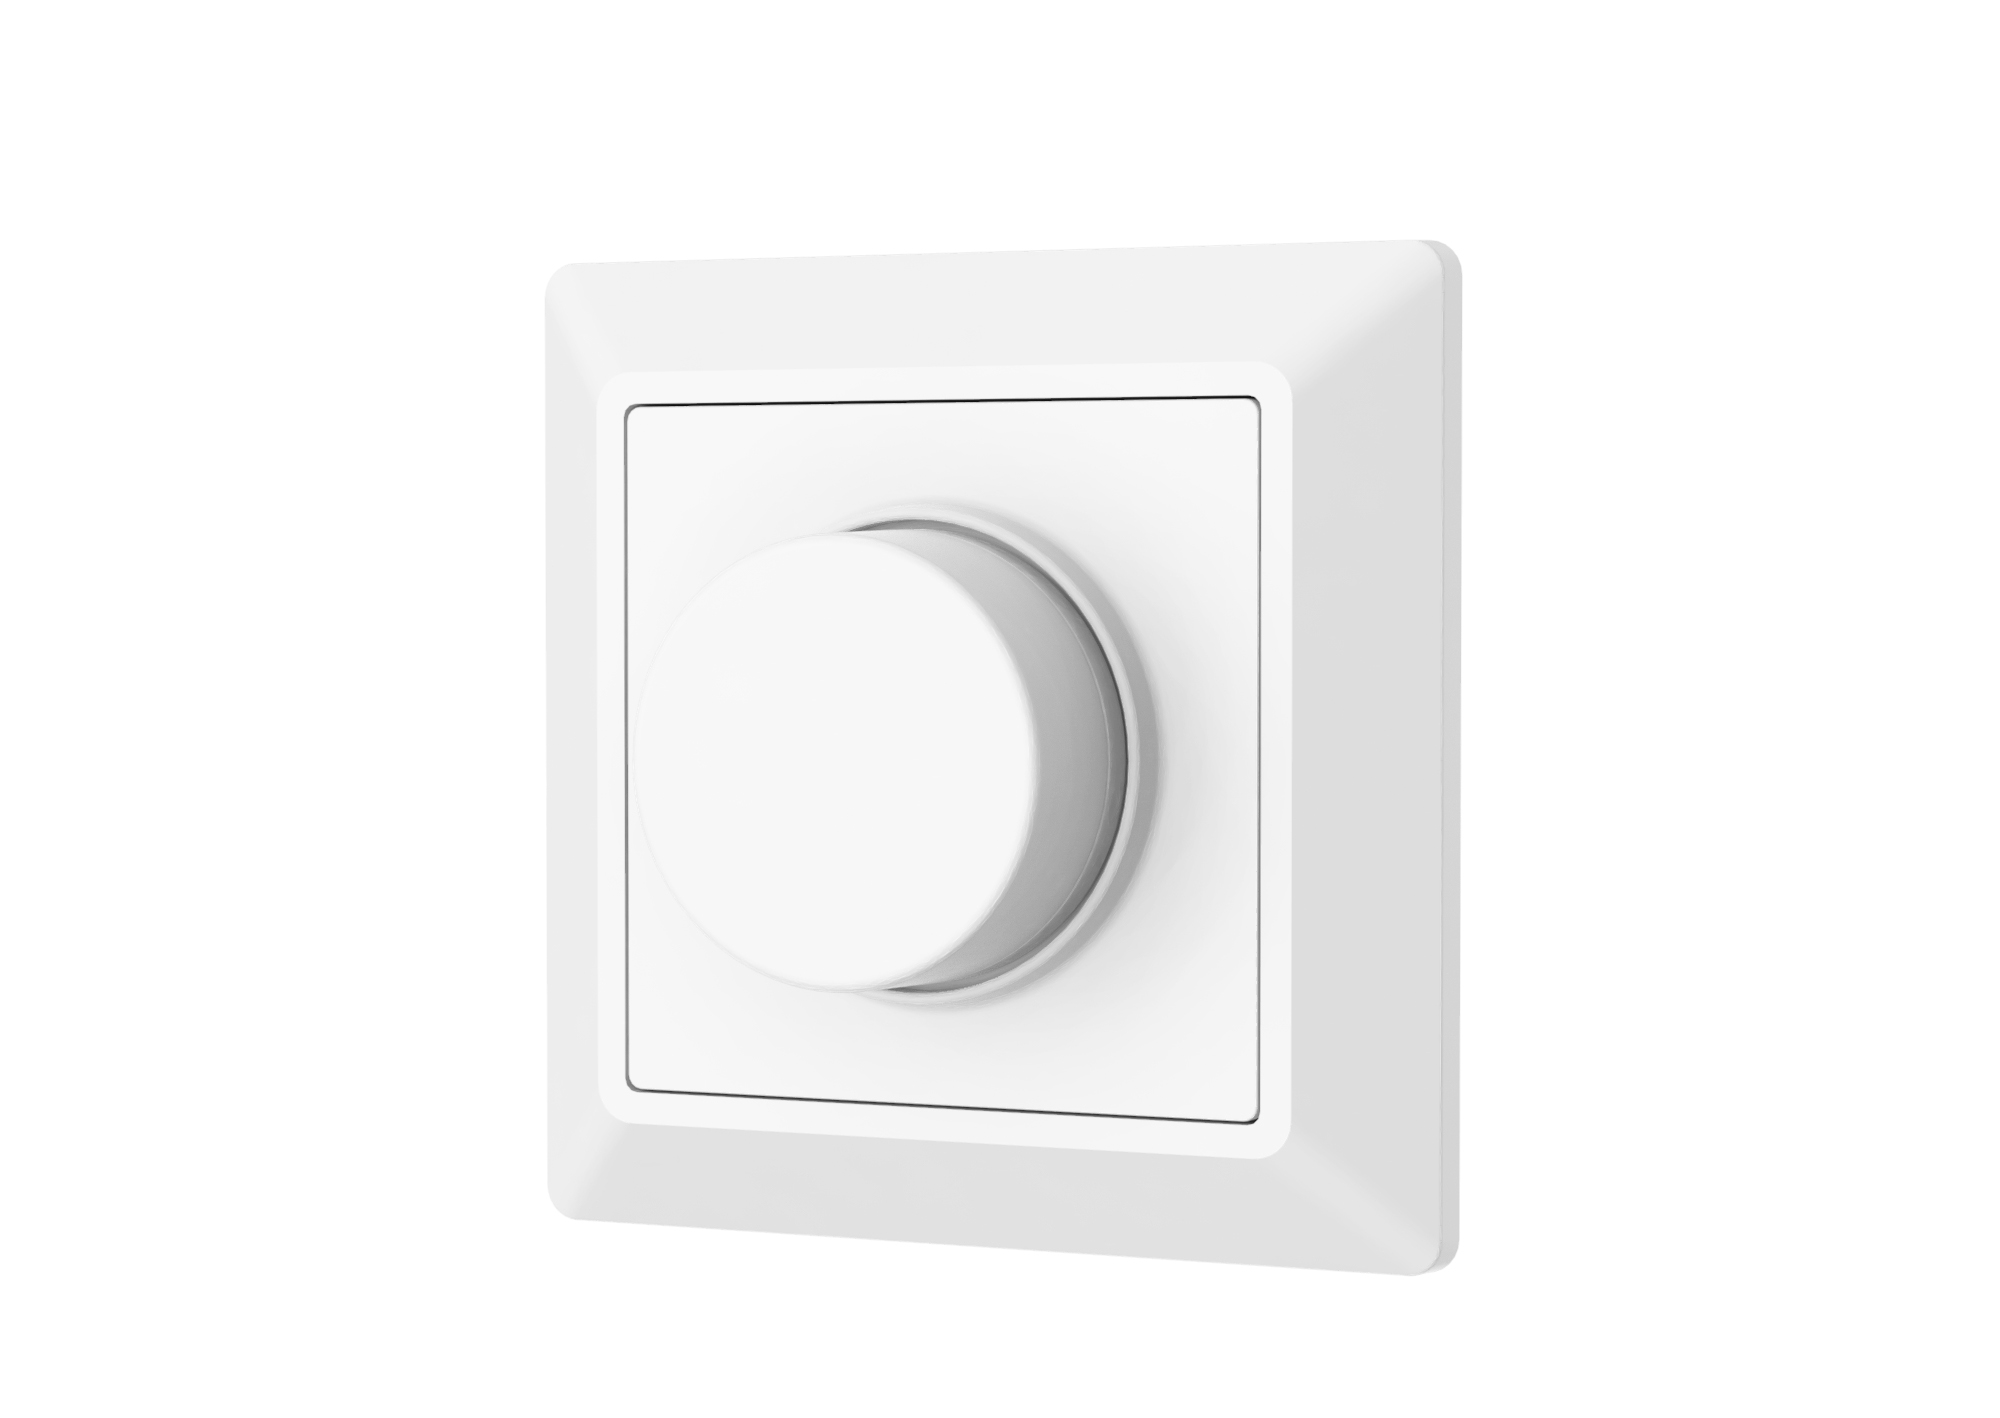 How To Install An LED Dimmer Switch